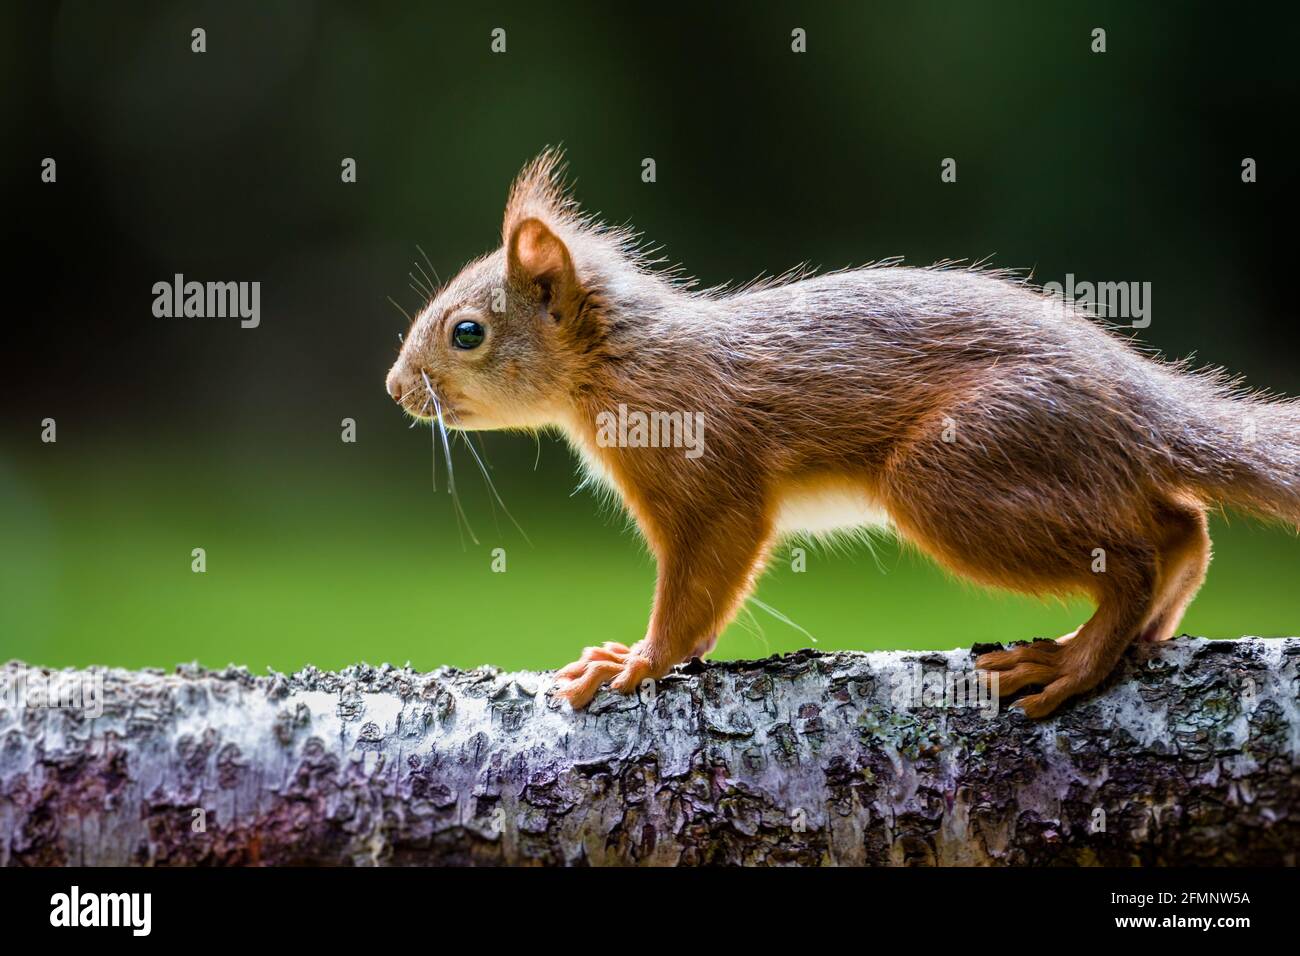 Young Red squirrel Sciurus vulgaris on a log Stock Photo